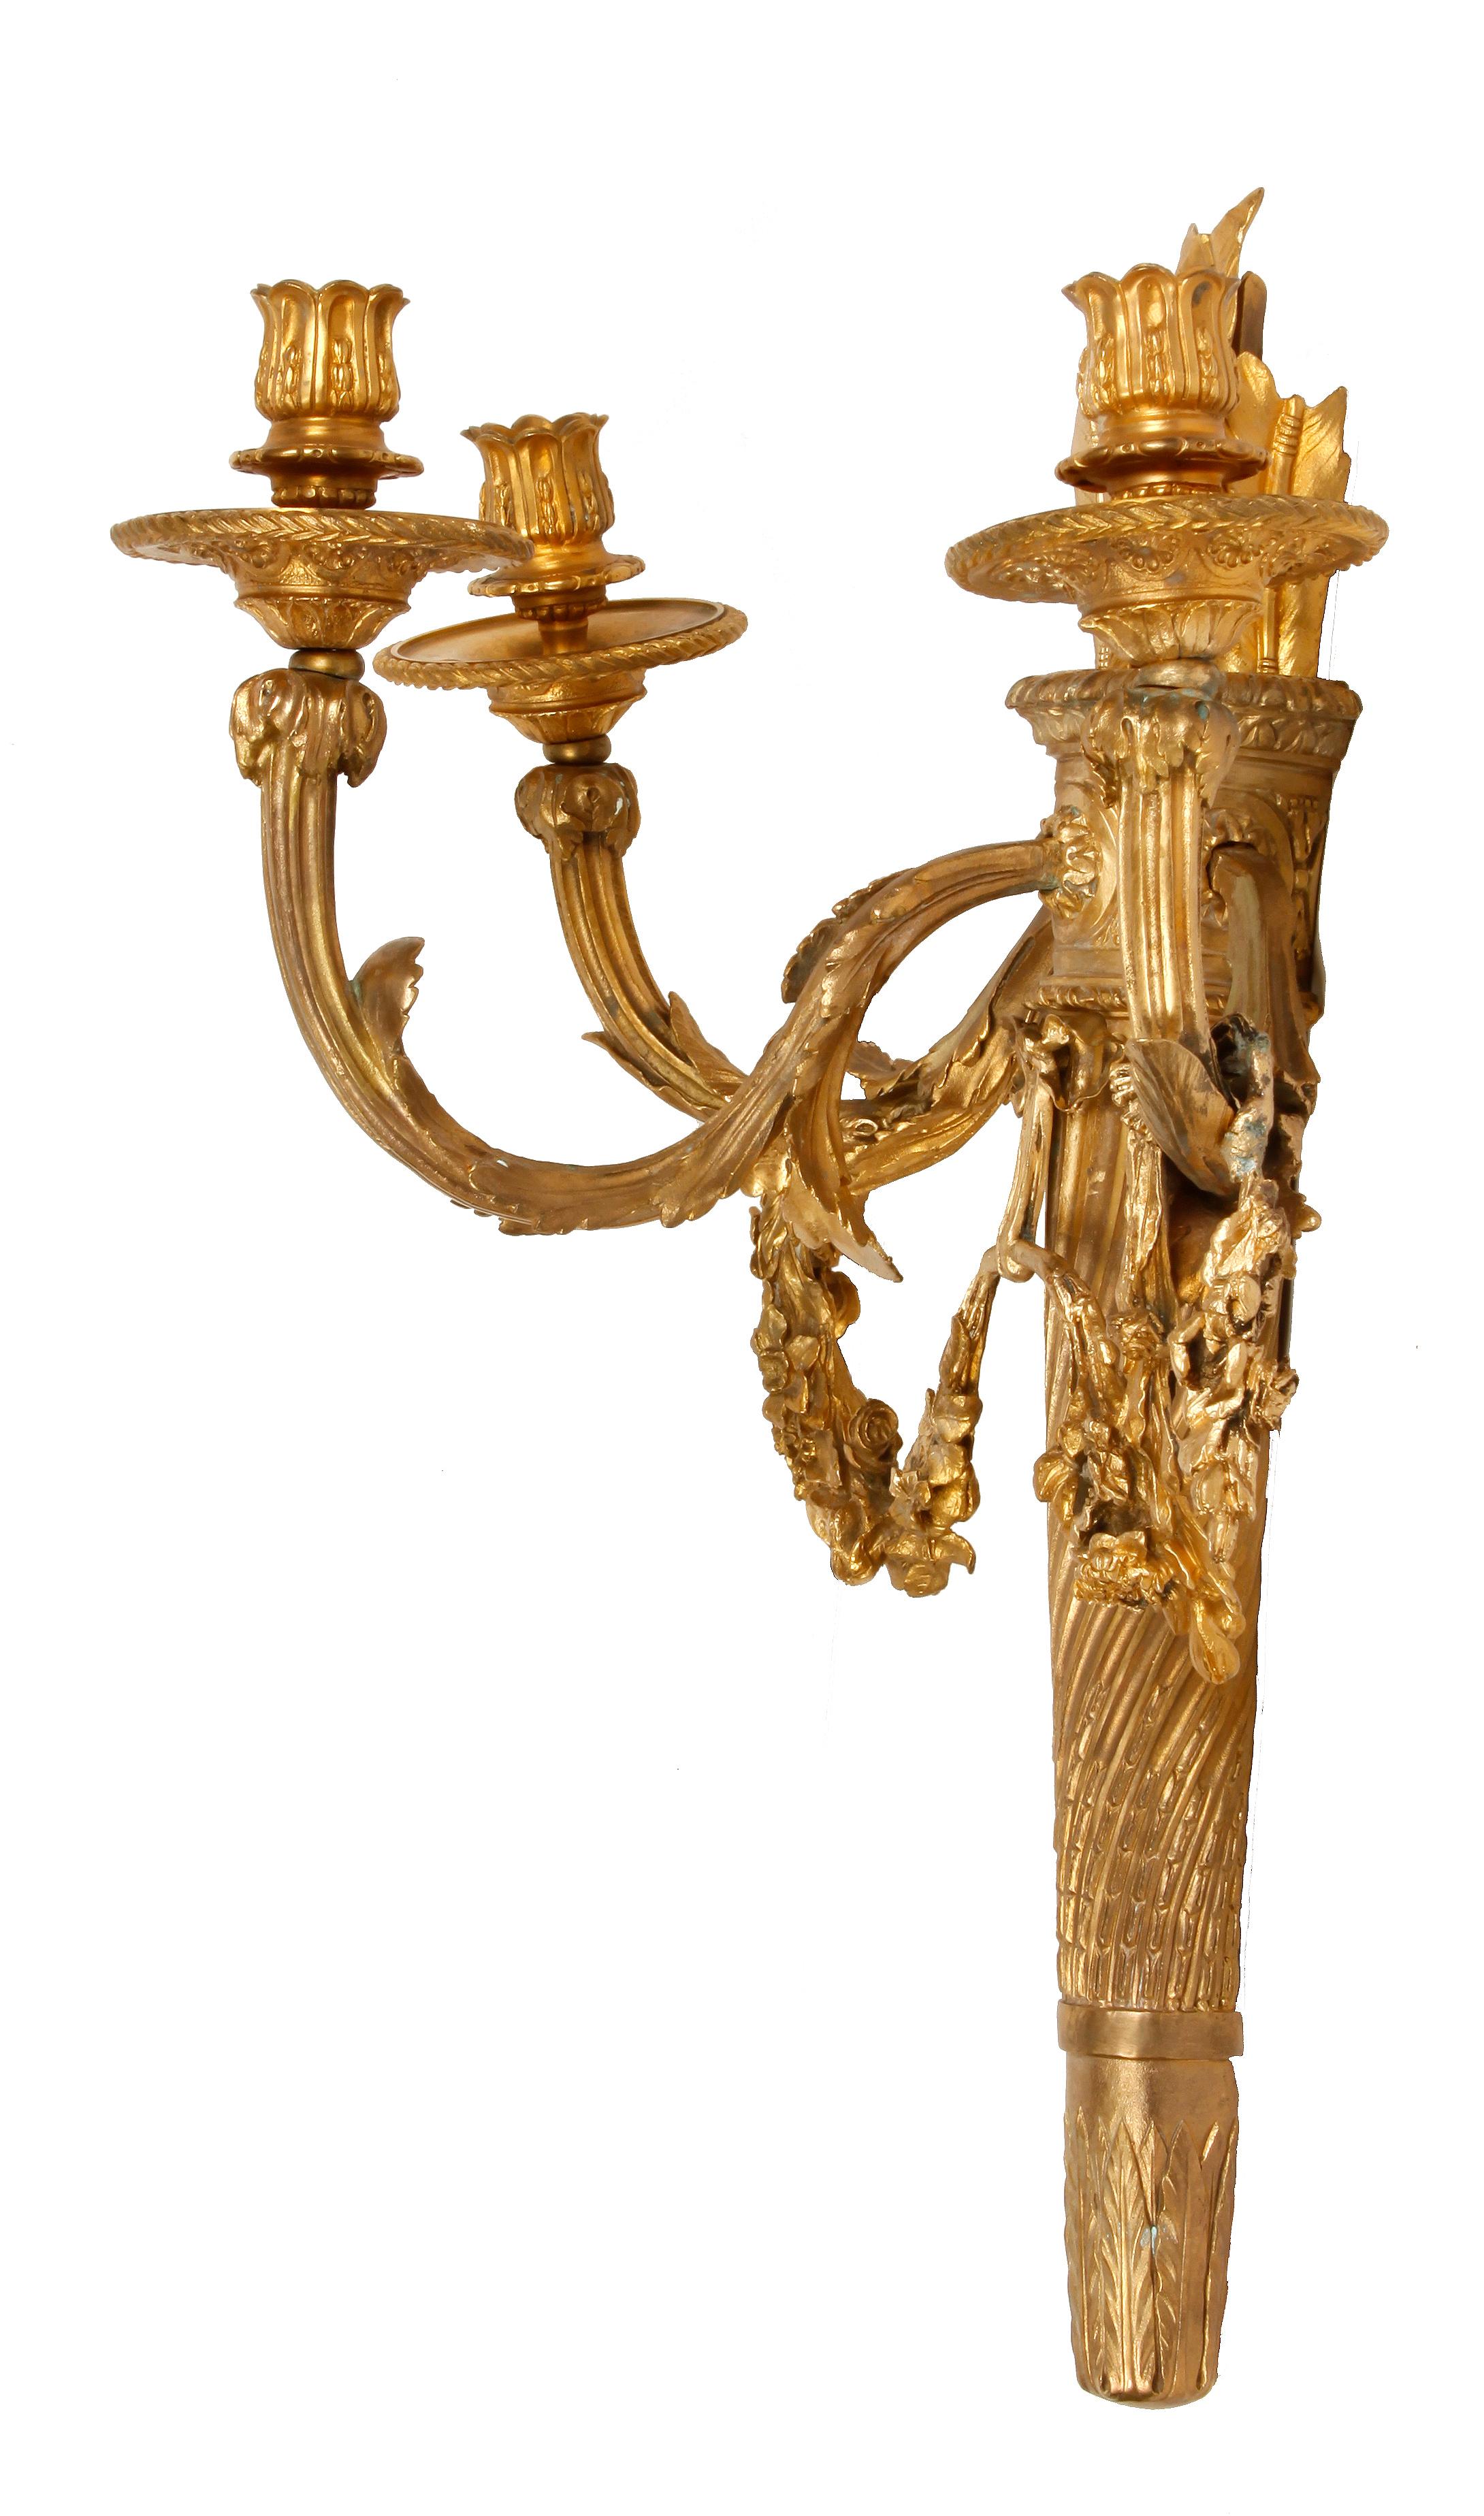 Pair of antique French Empire sconces.